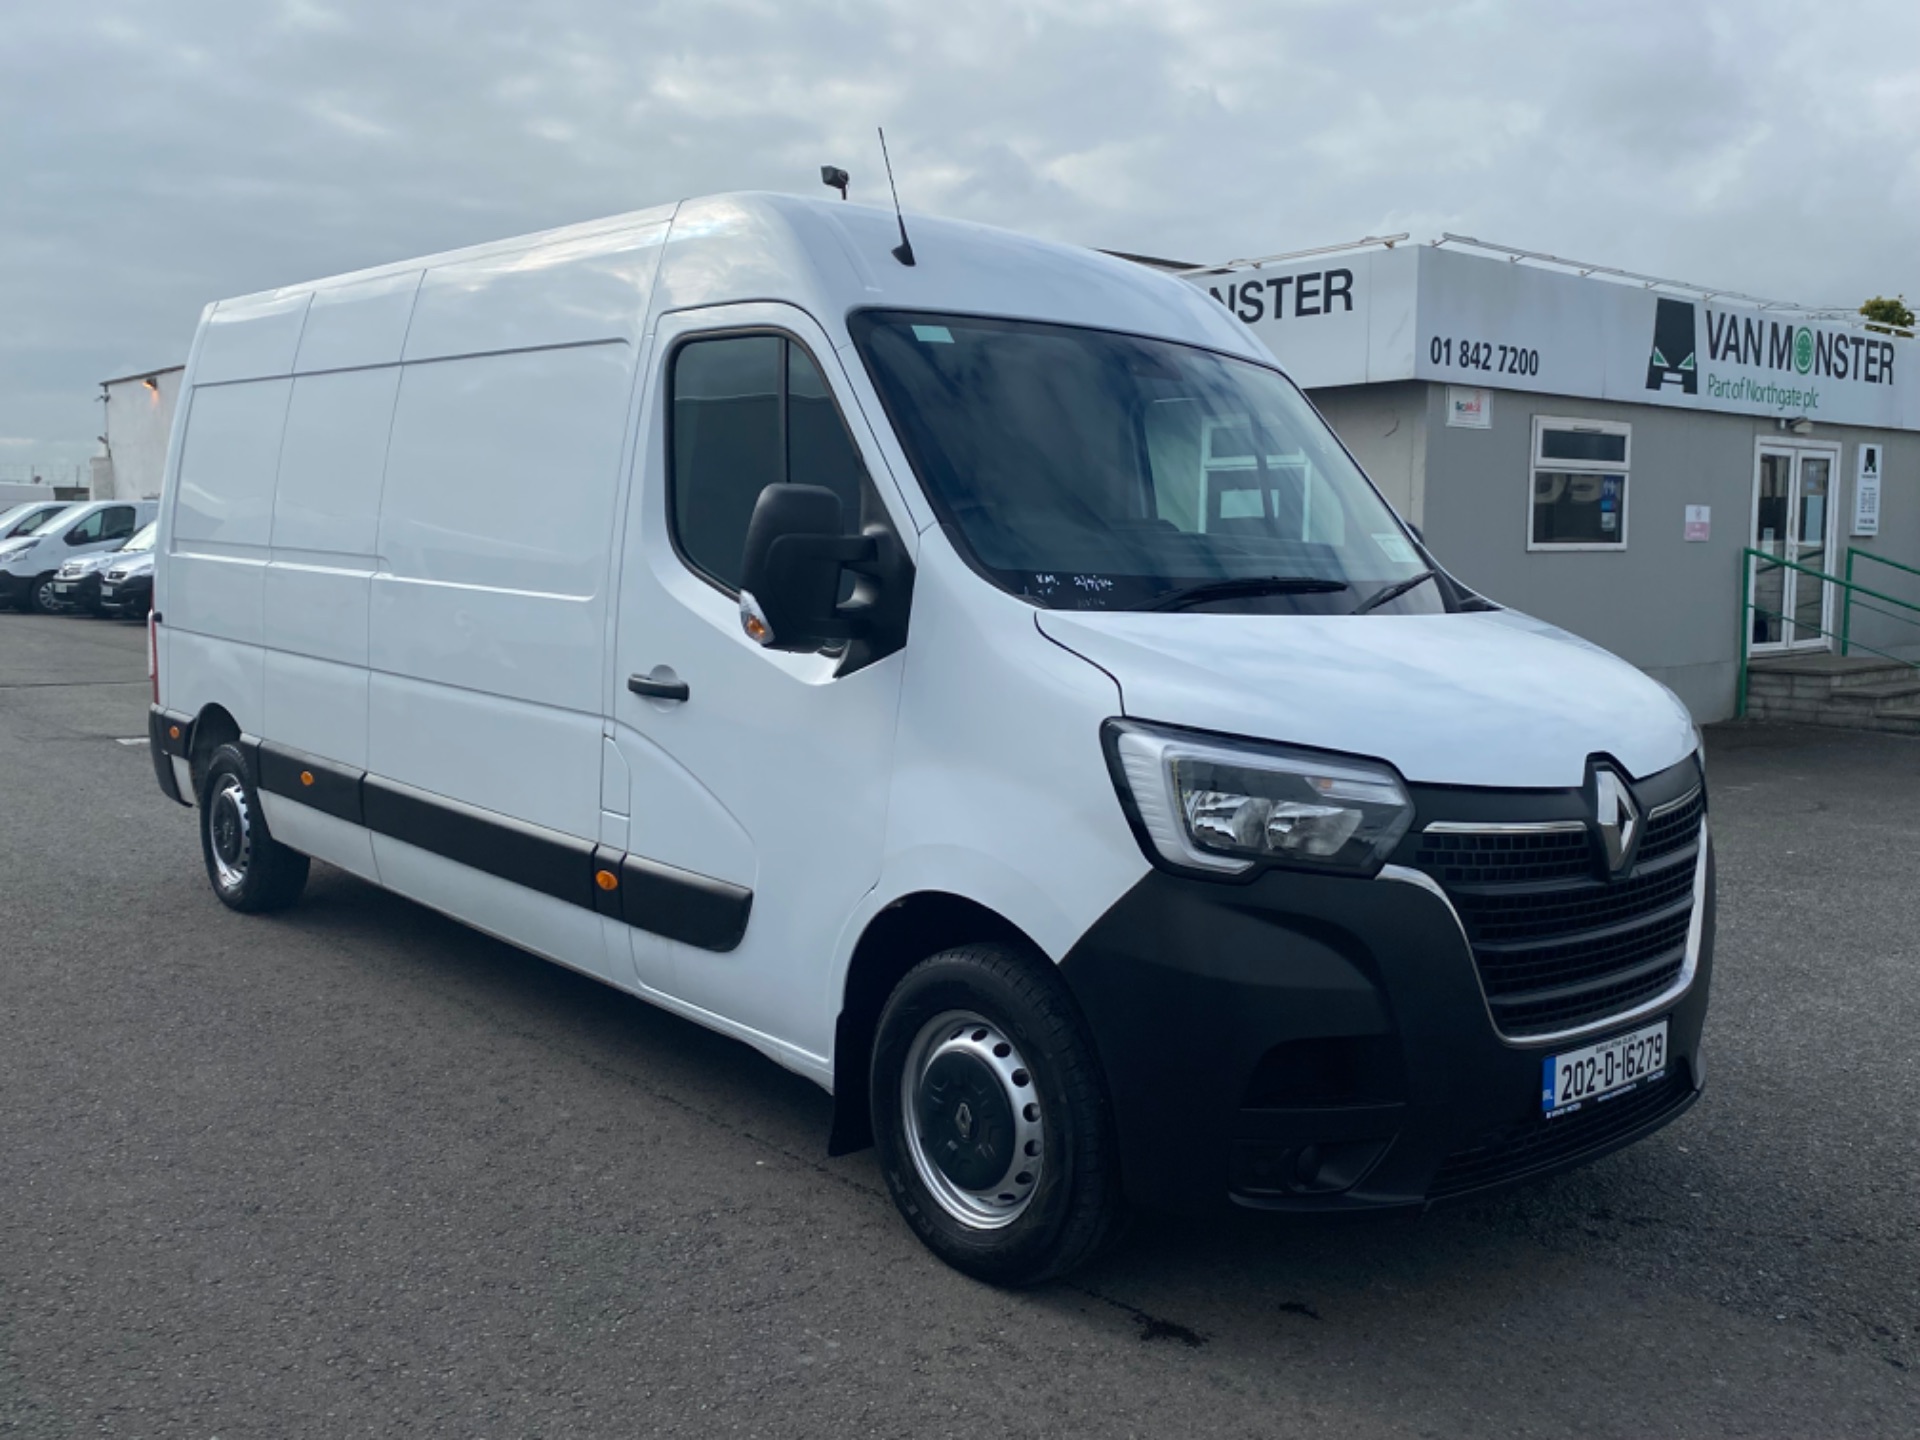 2020 Renault Master III PH2 FWD LM35 DCI 135 MY19 (202D16279)